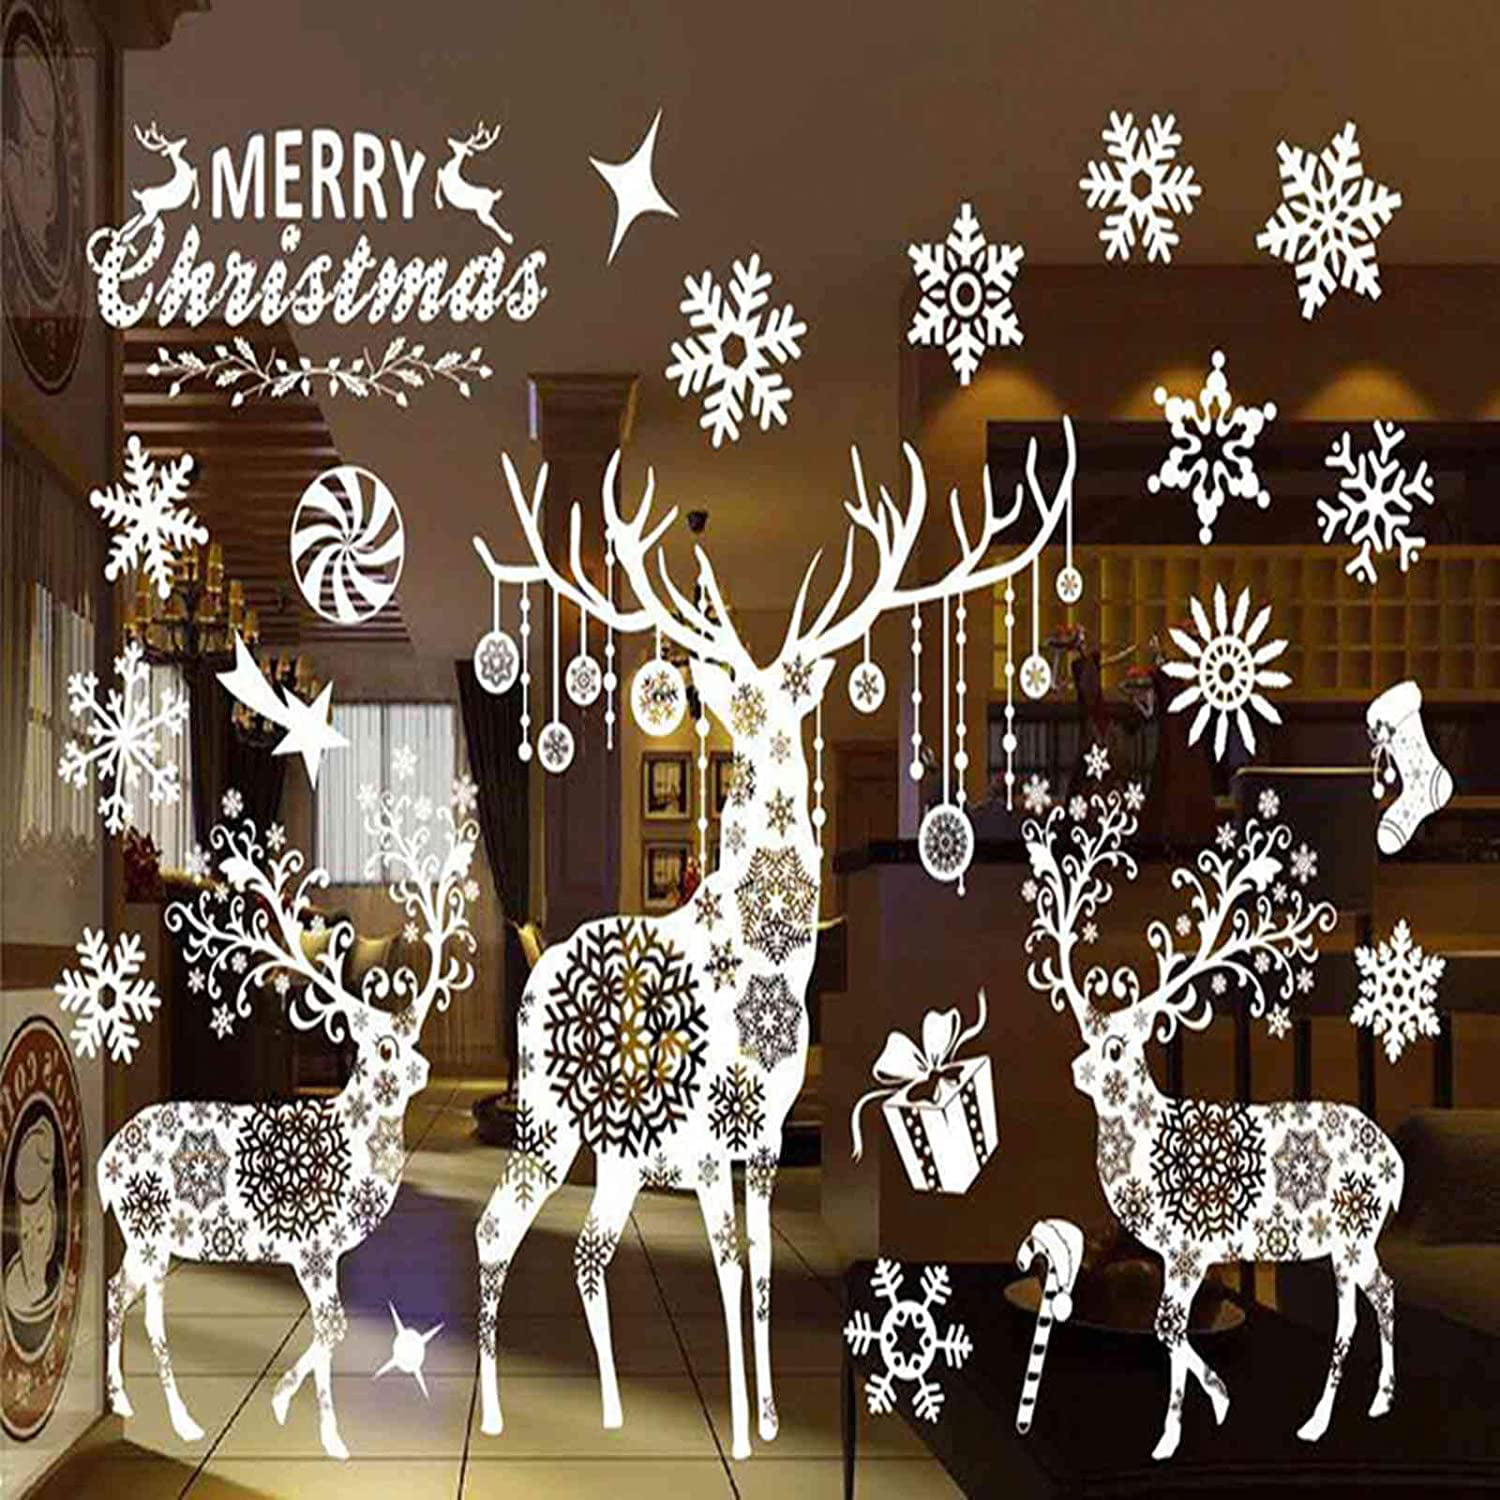 Reindeer and snowflake Christmas wall stickers 